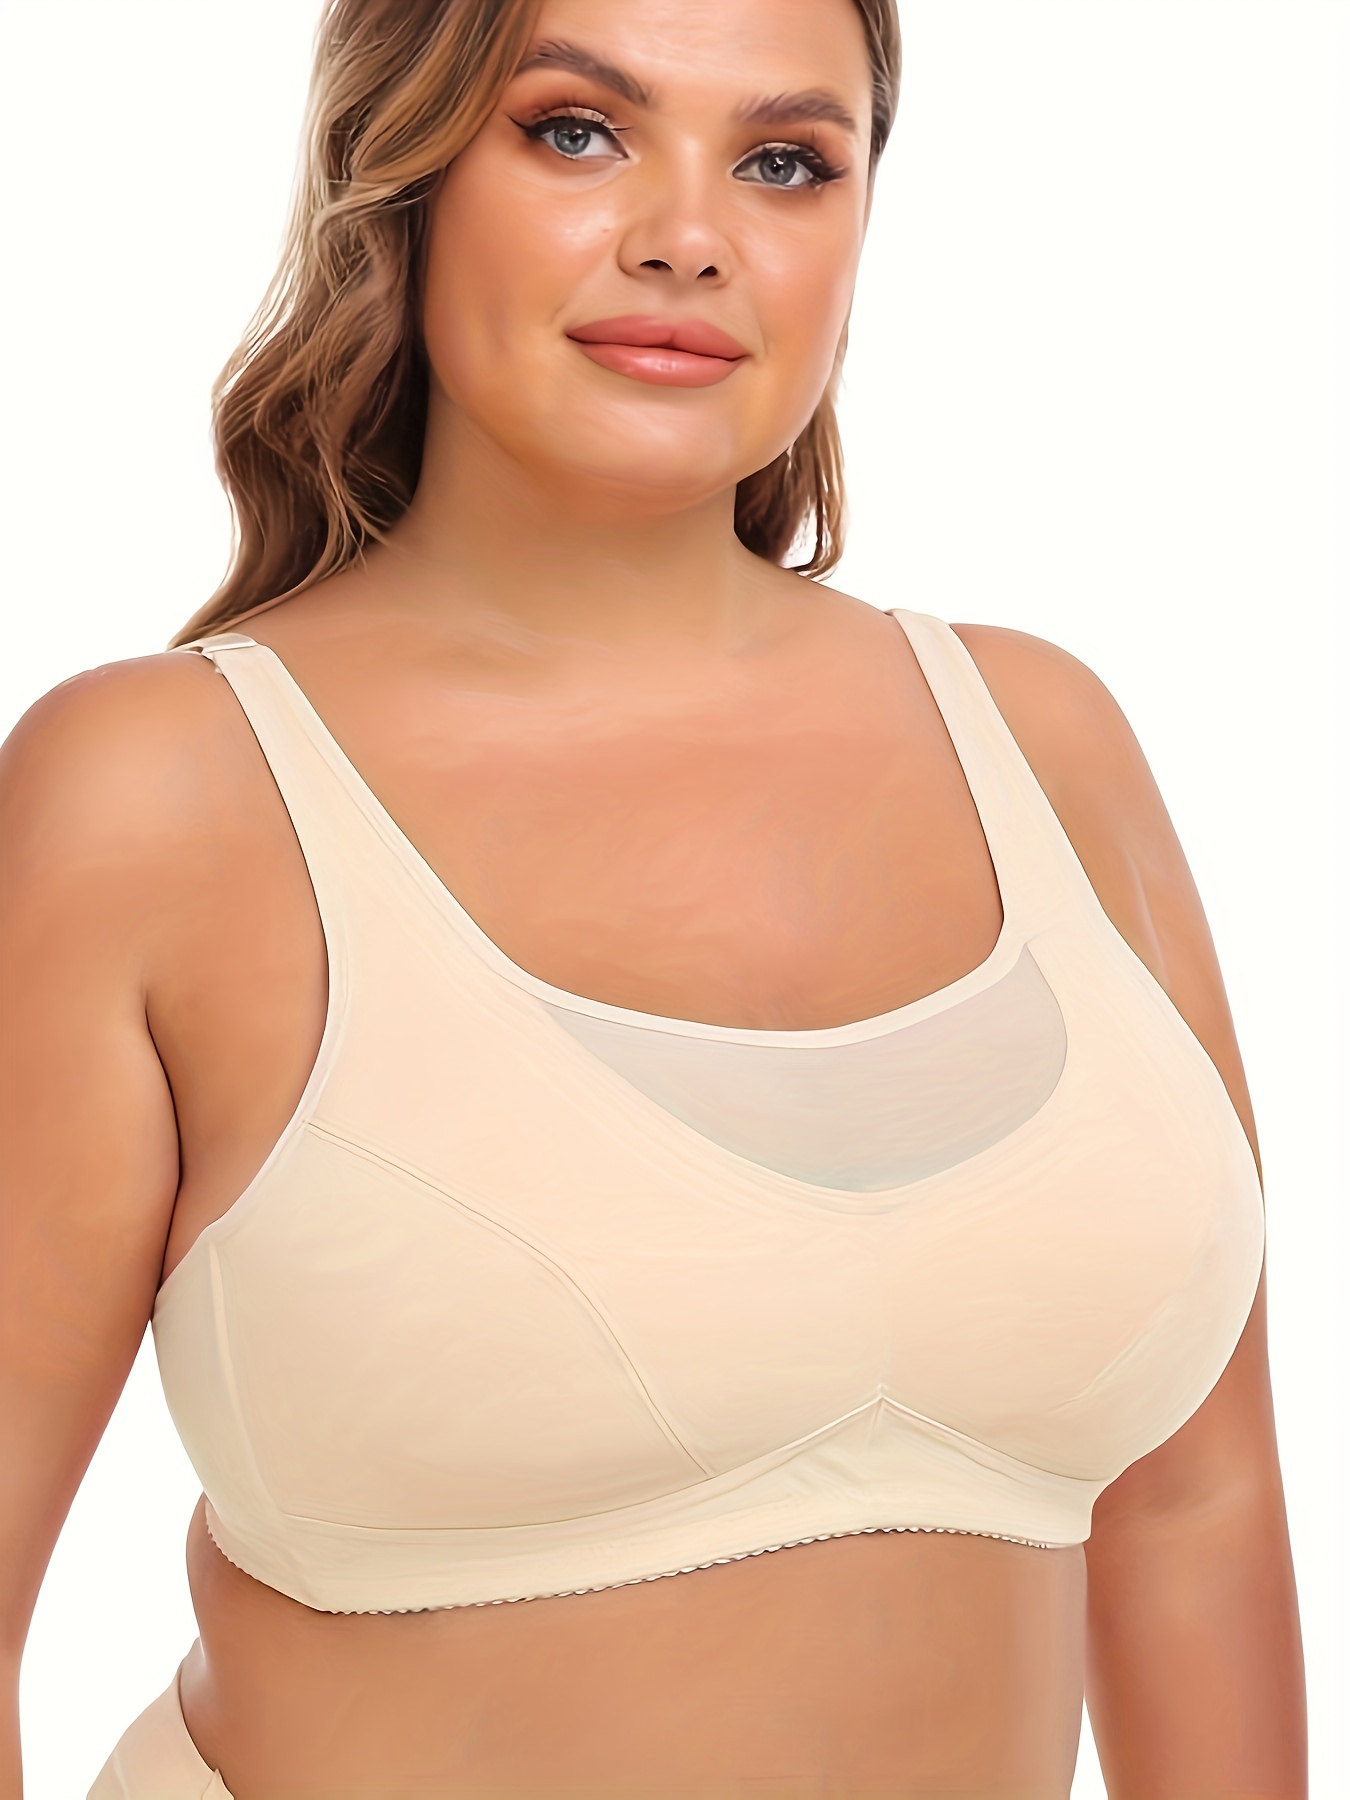 Plus Size Women's Full Coverage High Impact Seamless Workout